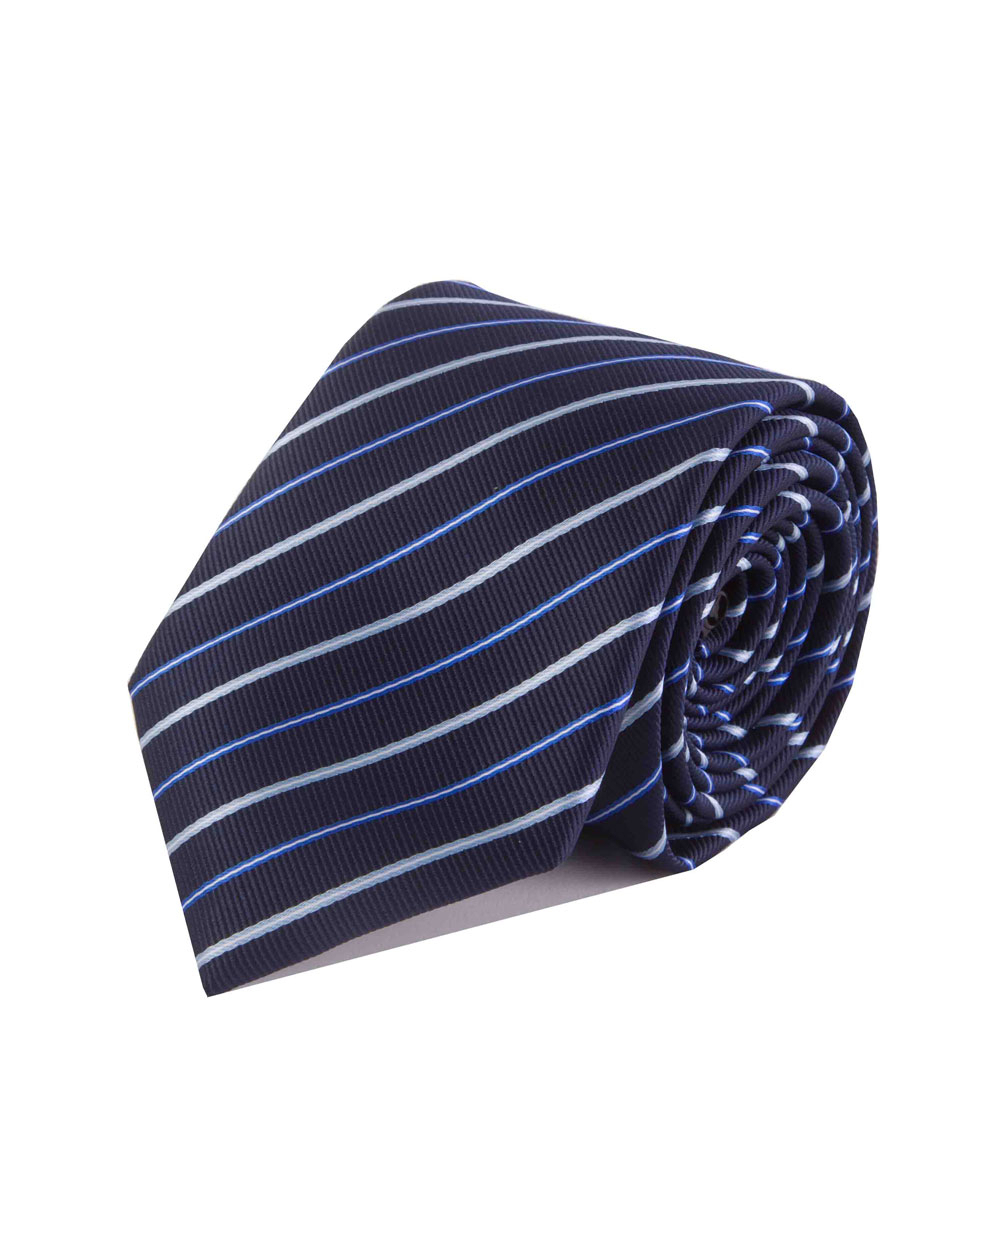 Double Two Extra Long Striped Tie (navy/sky)